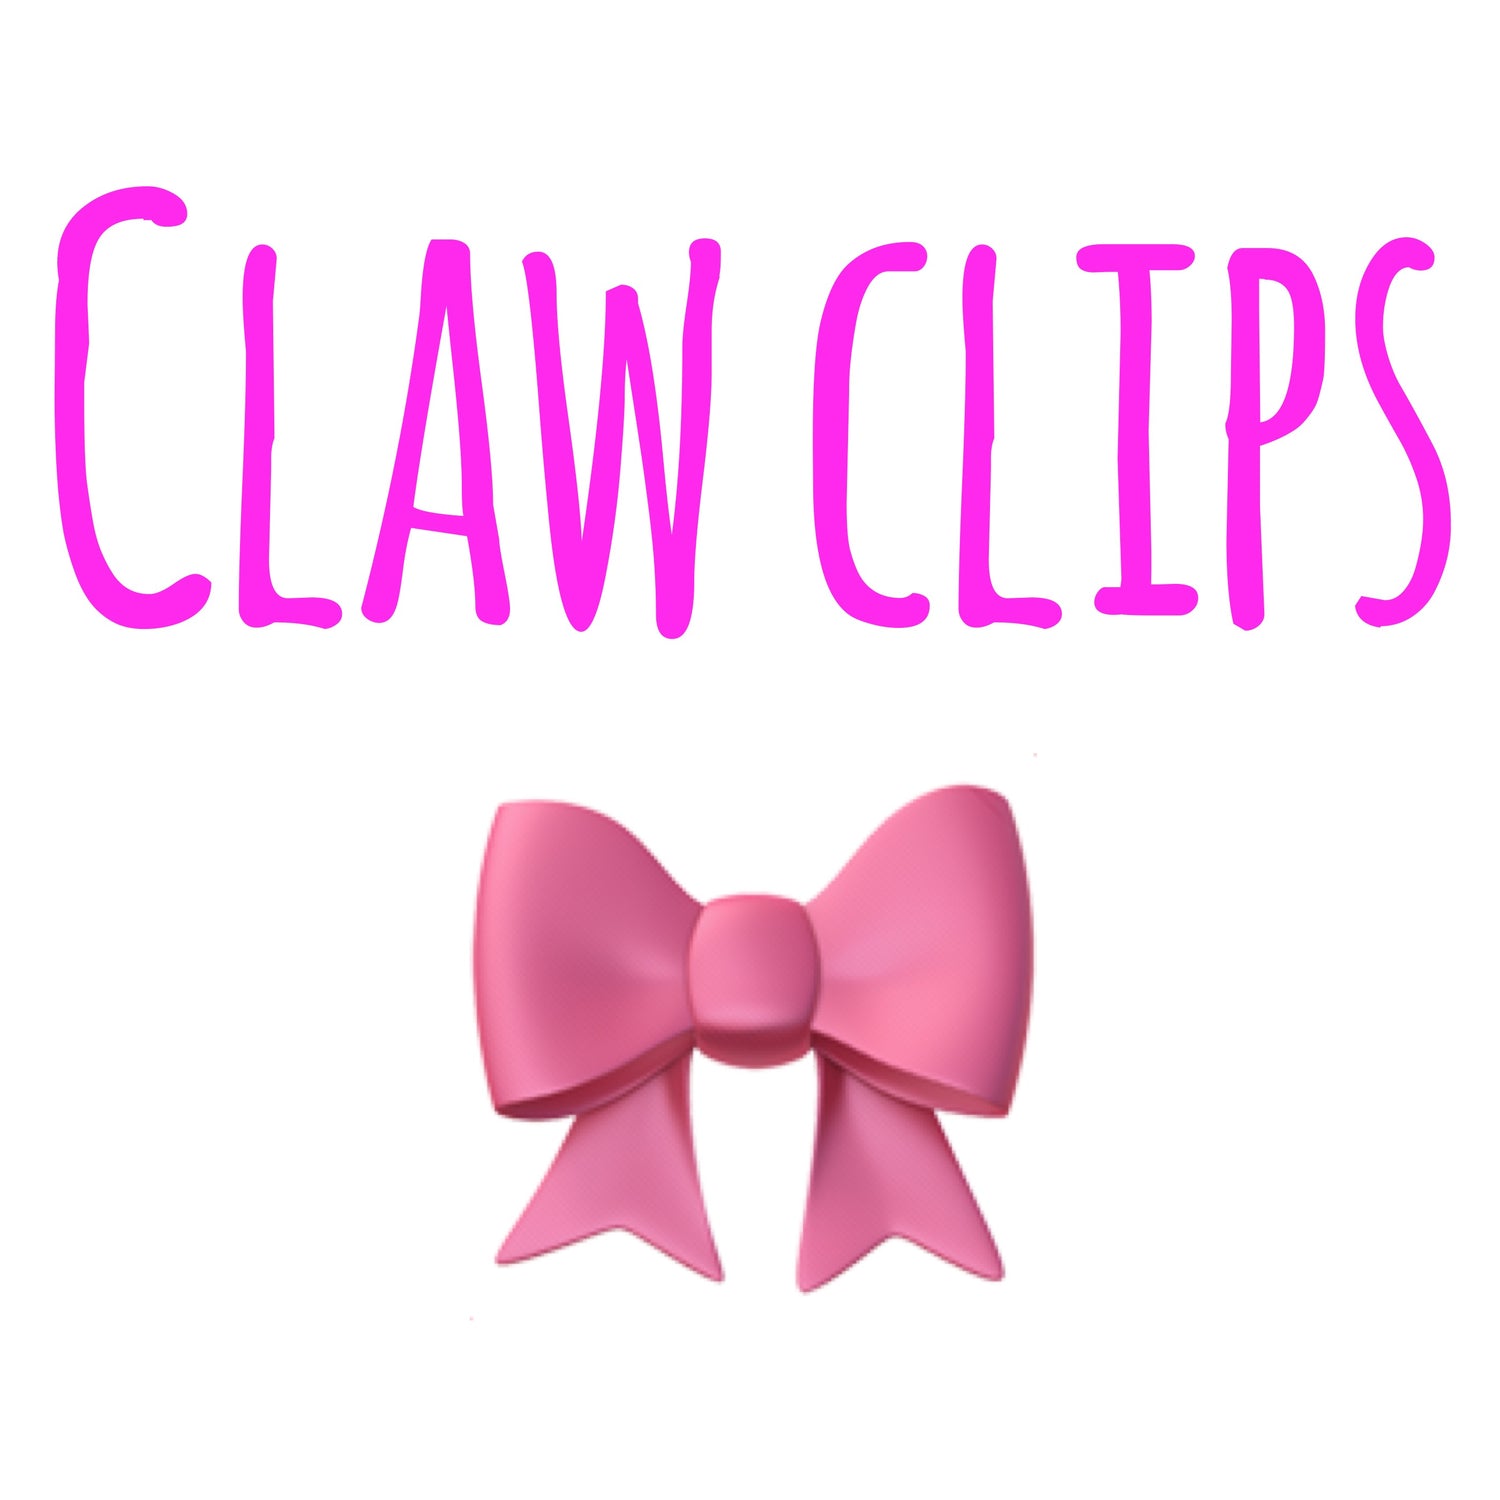 Claw clips